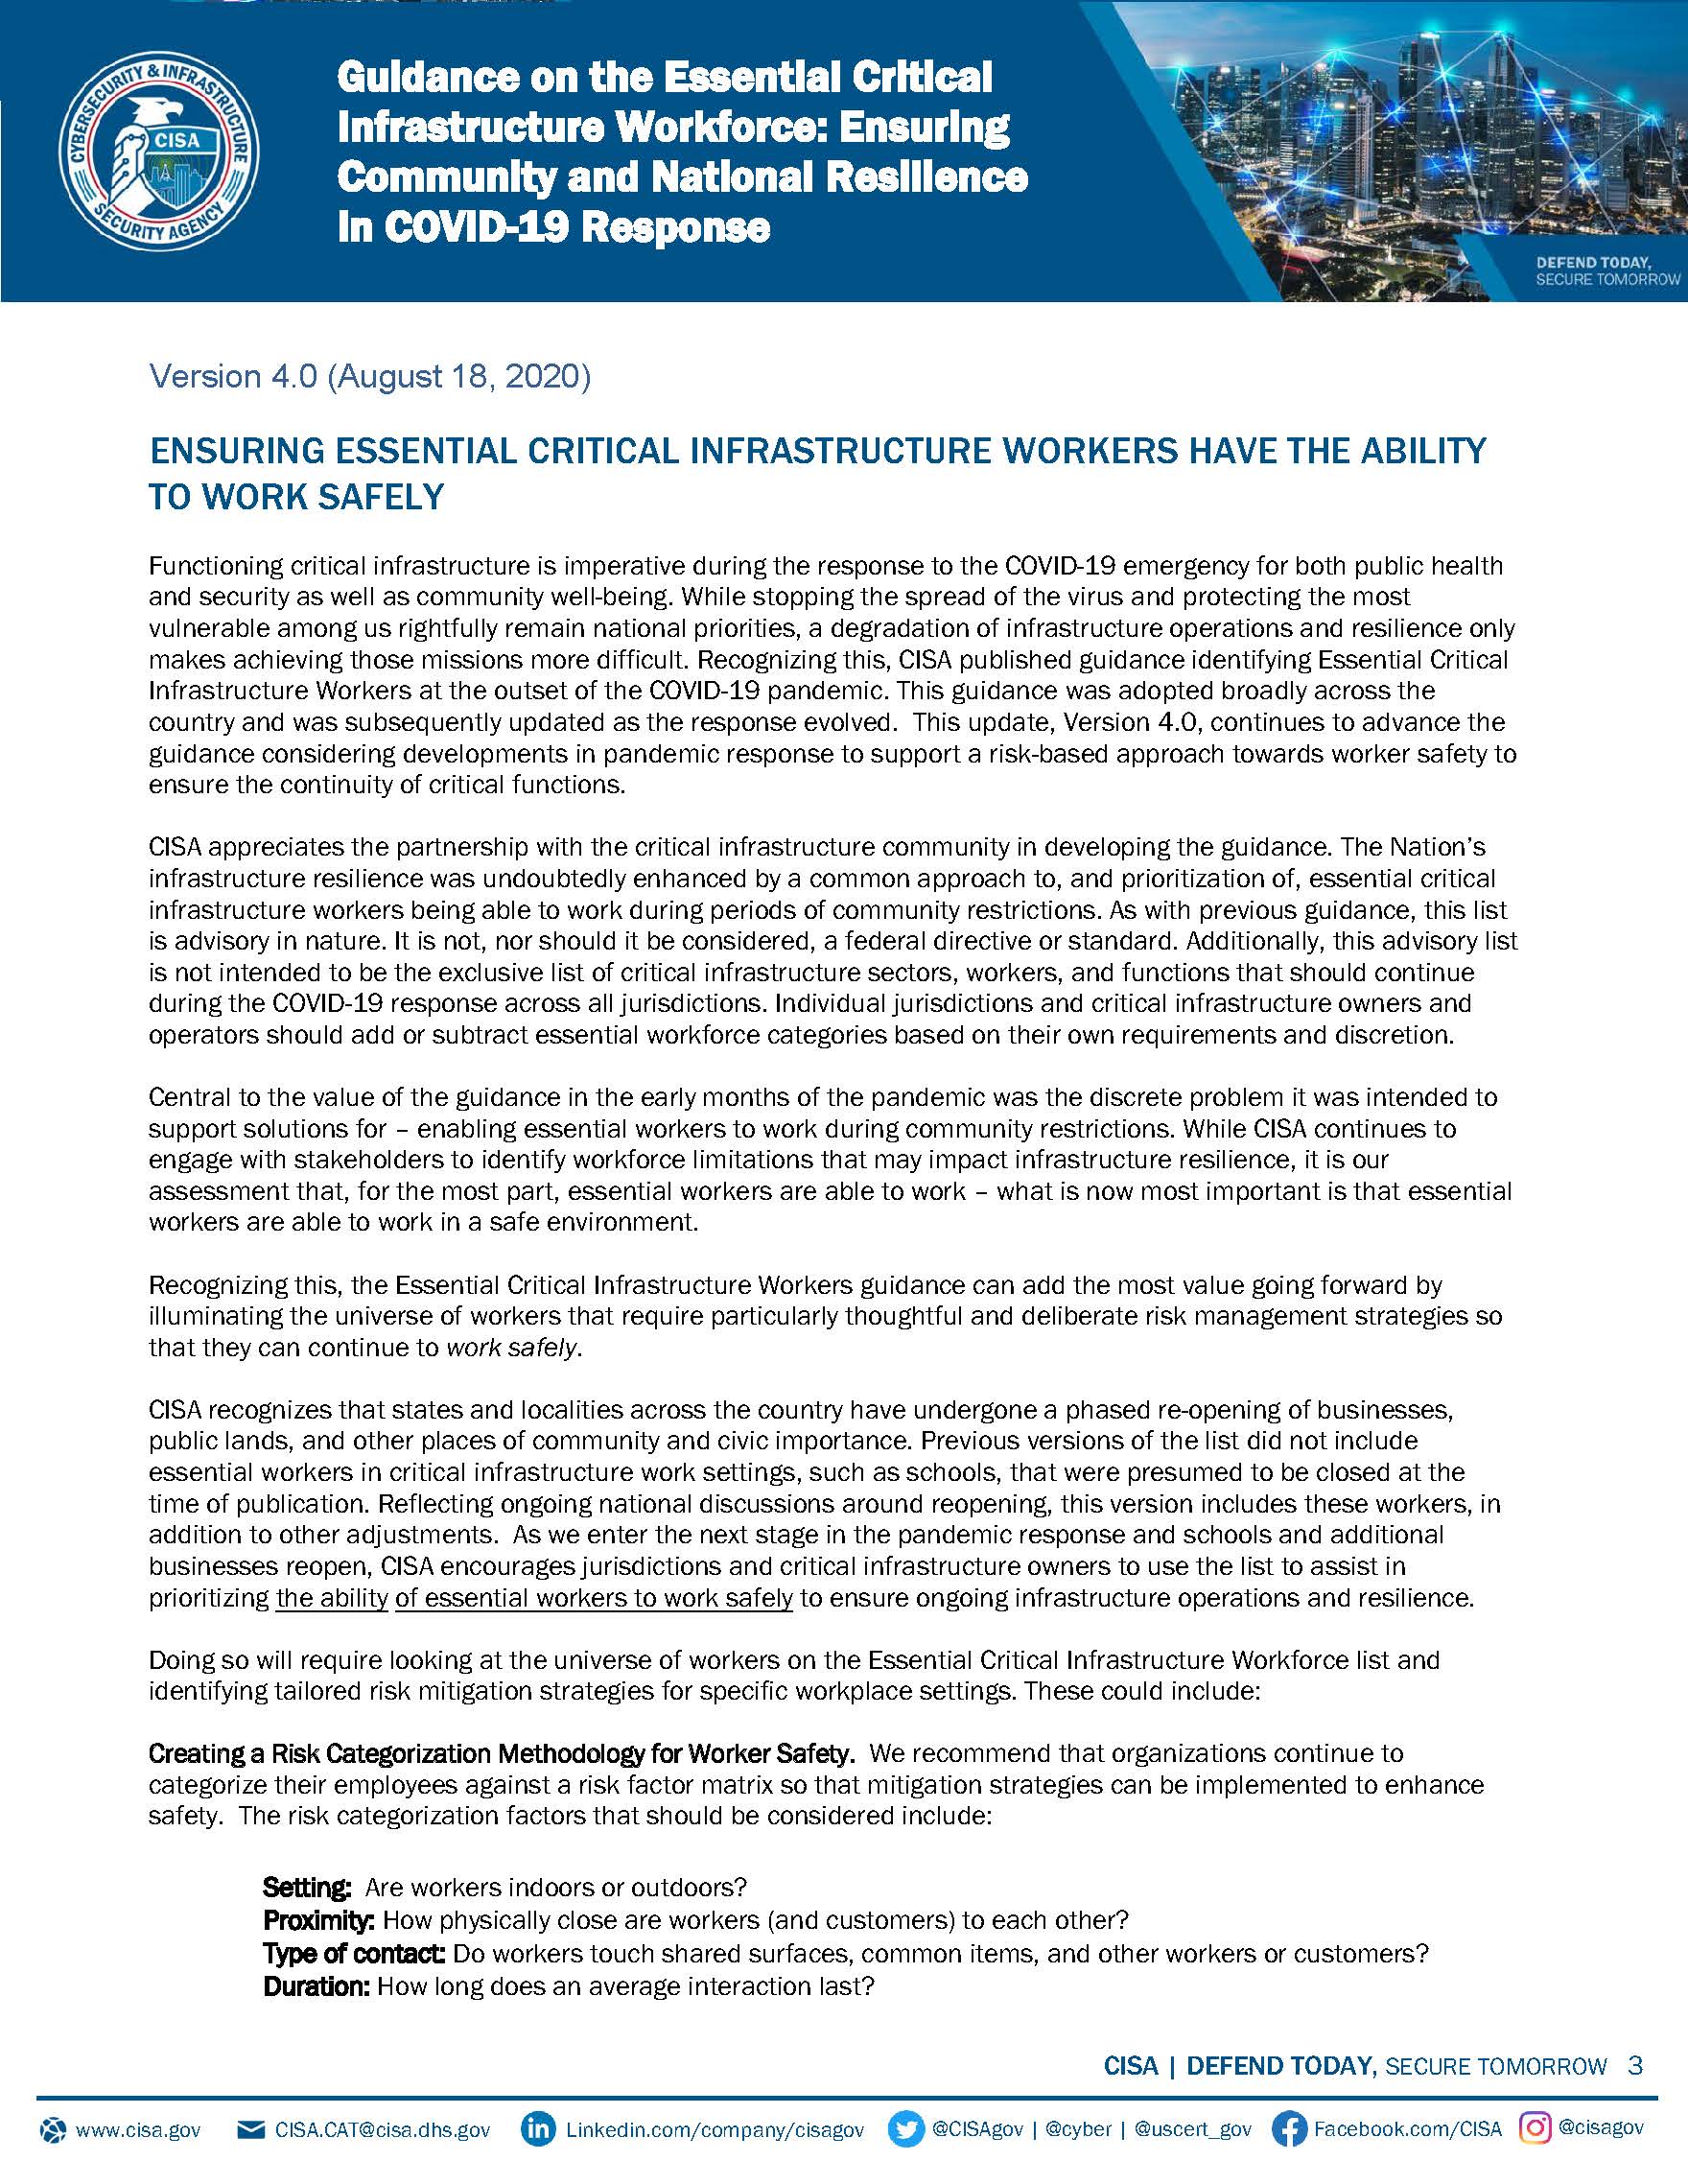 August 18, 2020
<br />
<br />ADVISORY MEMORANDUM ON ENSURING ESSENTIAL CRITICAL INFRASTRUCTURE WORKERS ABILITY TO WORK DURING THE COVID-19 RESPONSE
<br />
<br />FROM: Christopher C. Krebs Director
<br />Cybersecurity and Infrastructure Security Agency (CISA)